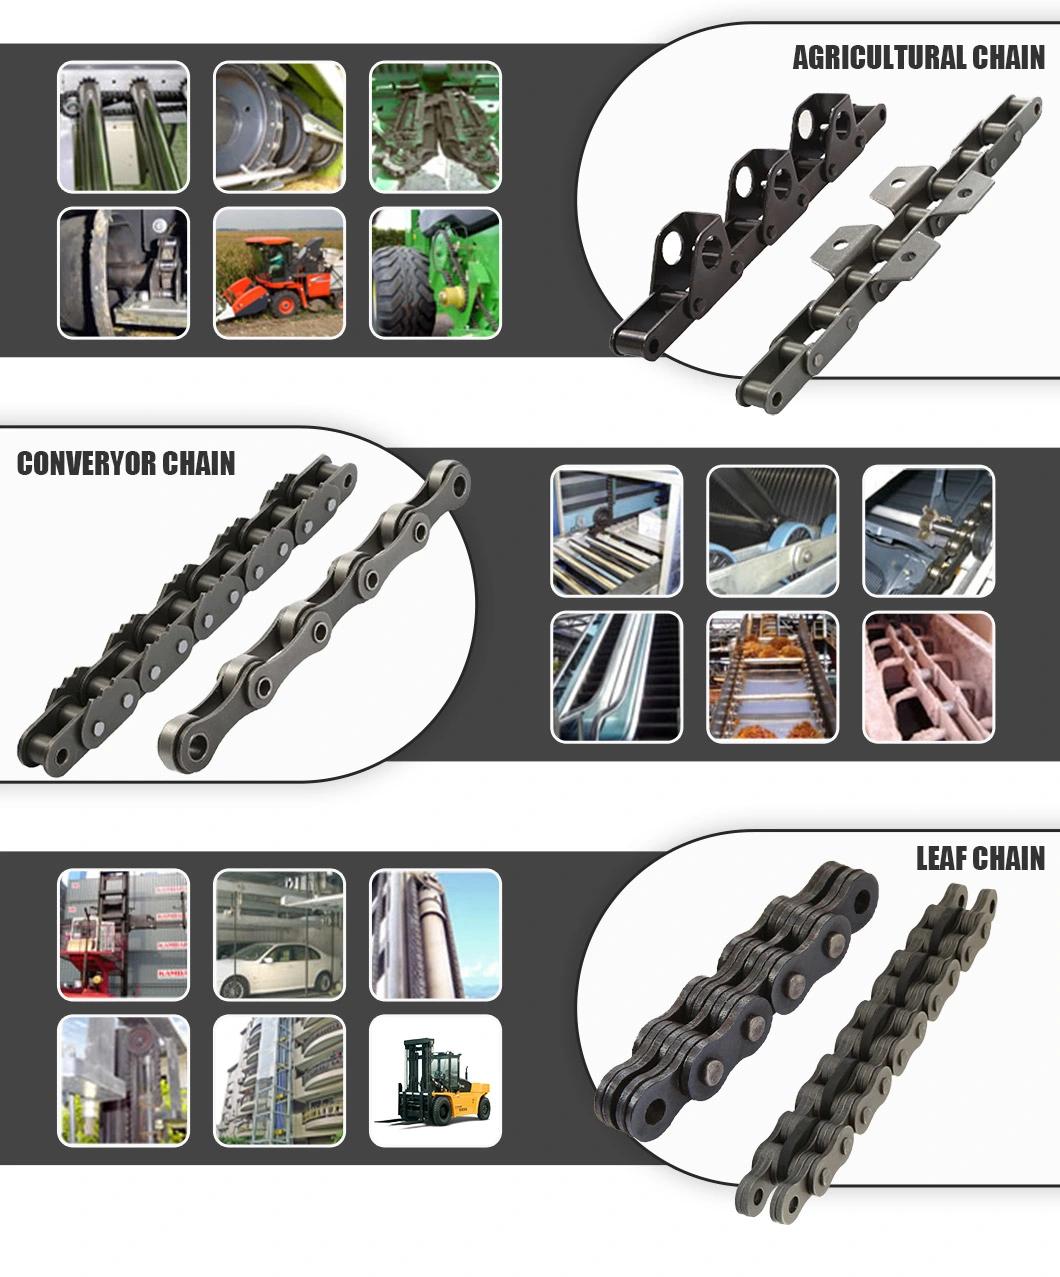 Drop Forged Rivetless Chain with Competitive Price (X458, S348)